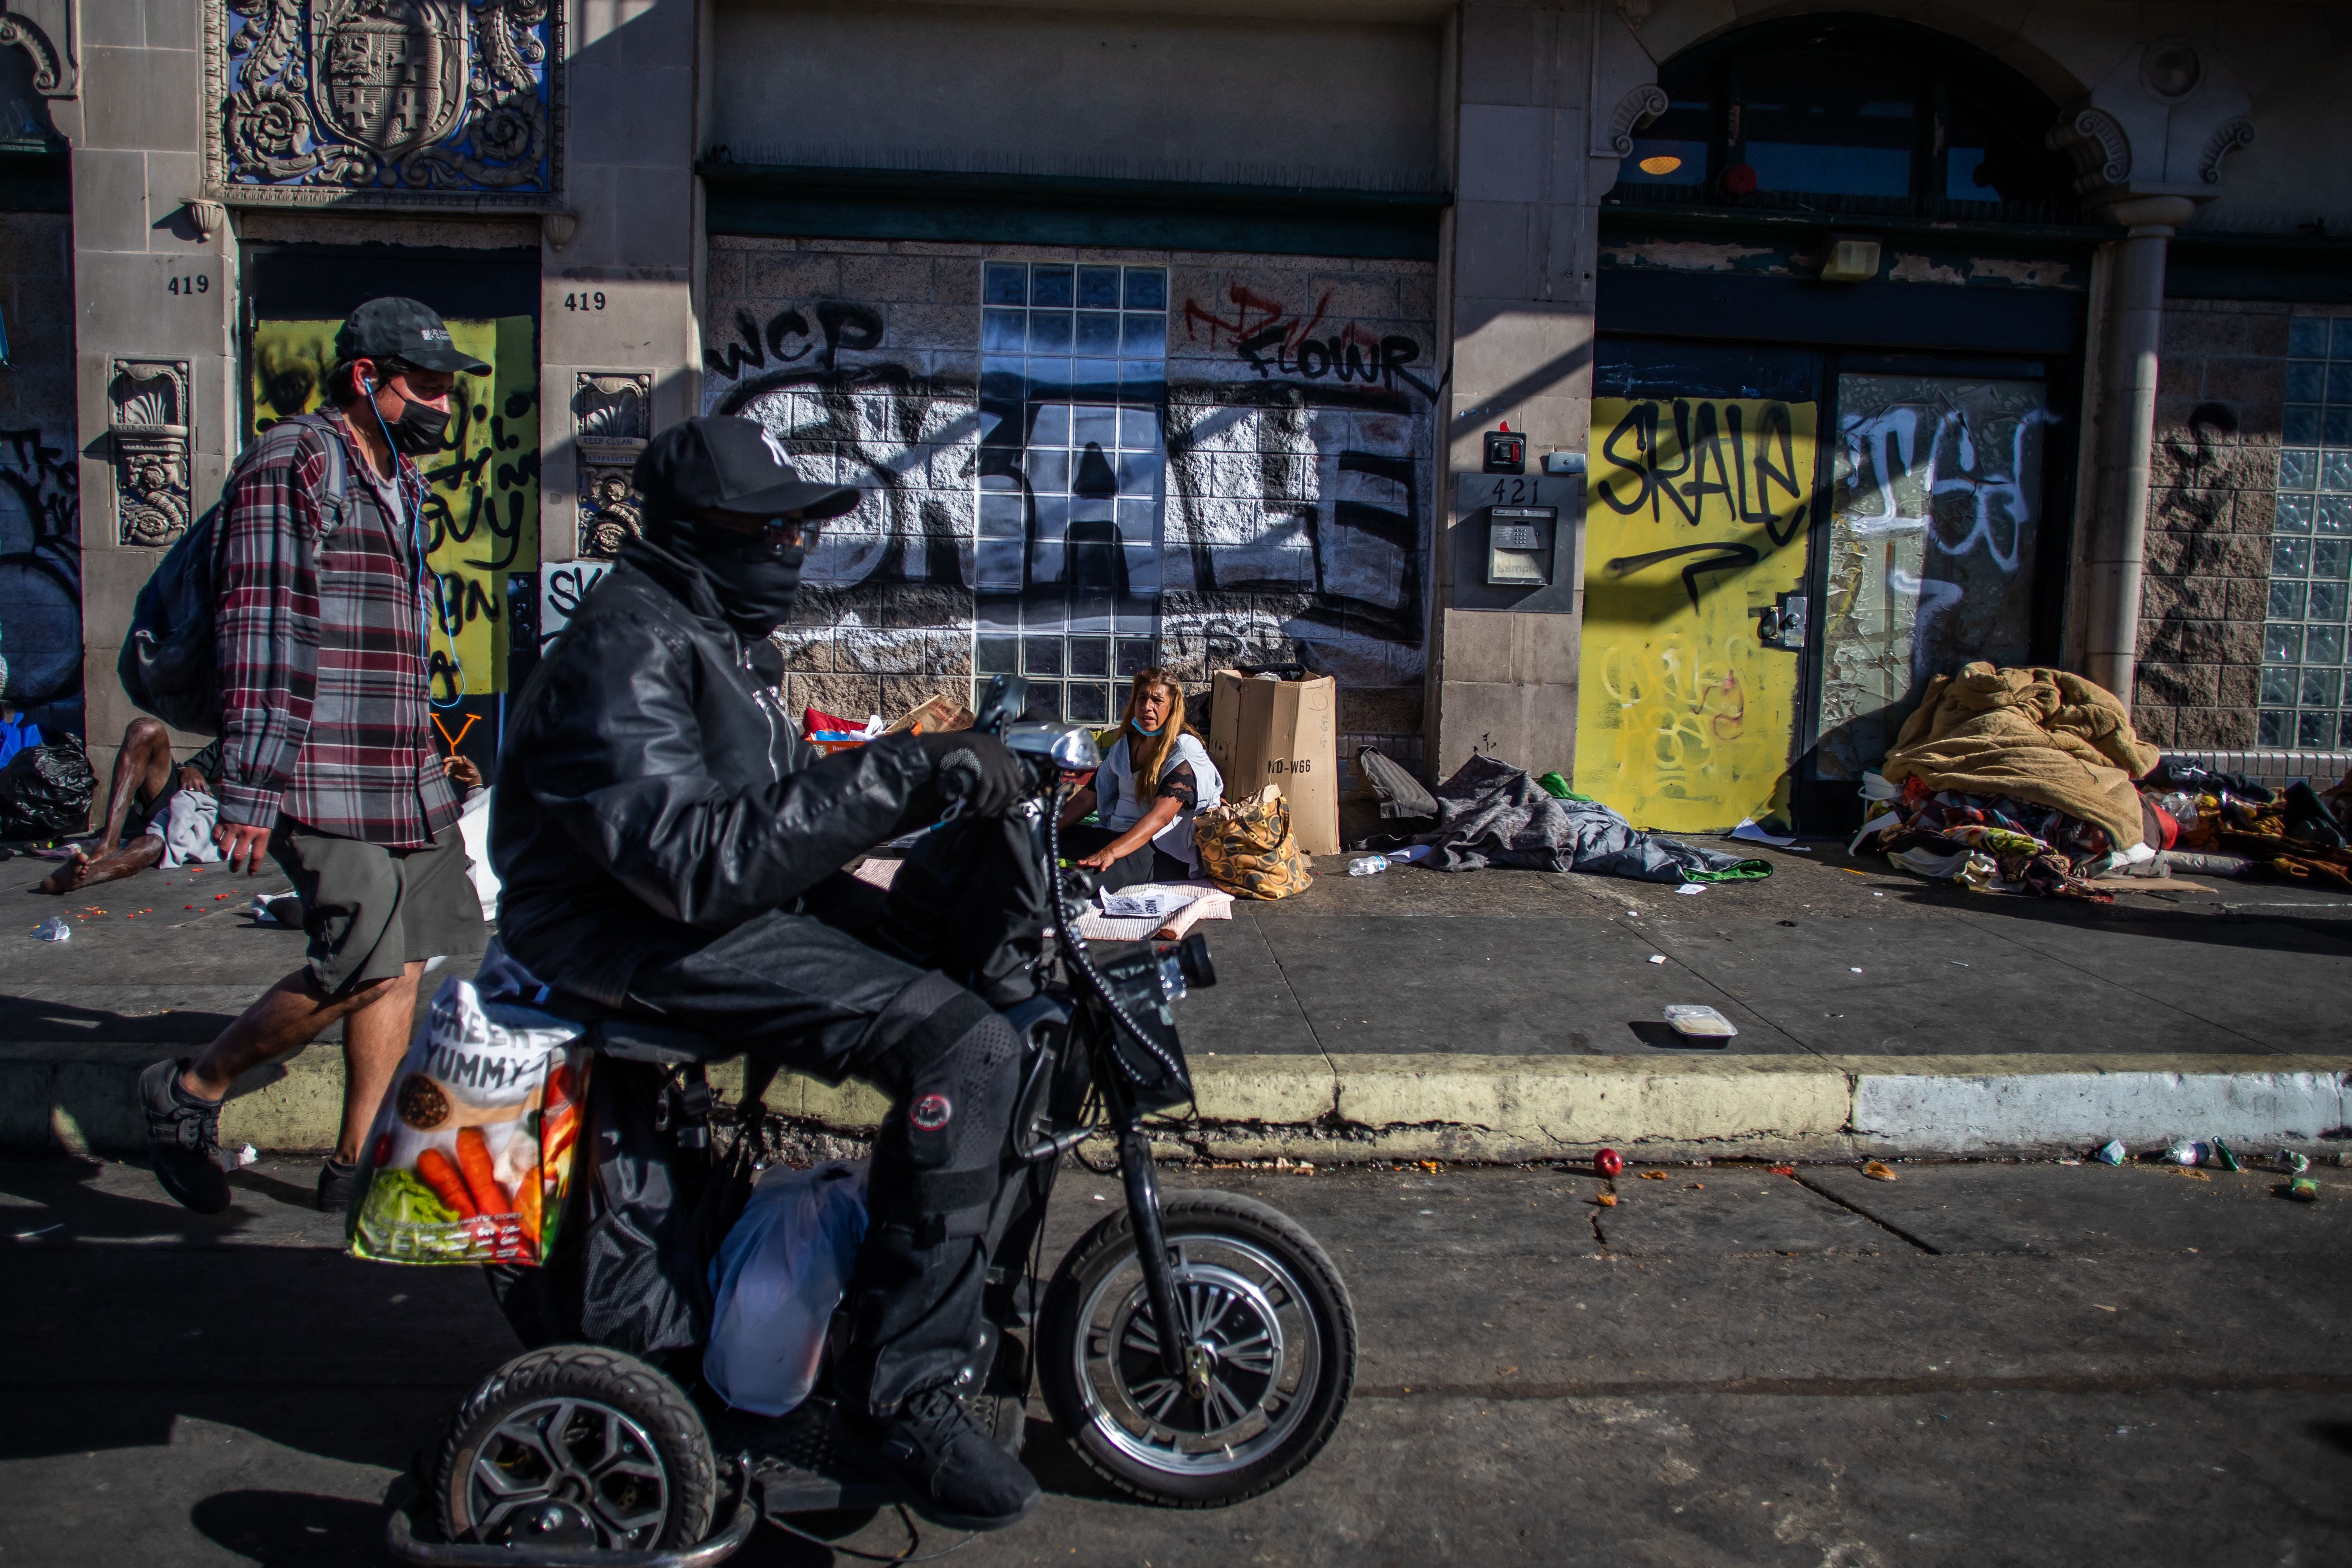 File photo: People walk by the Skid Row neighbourhood of downtown Los Angeles on 25 November